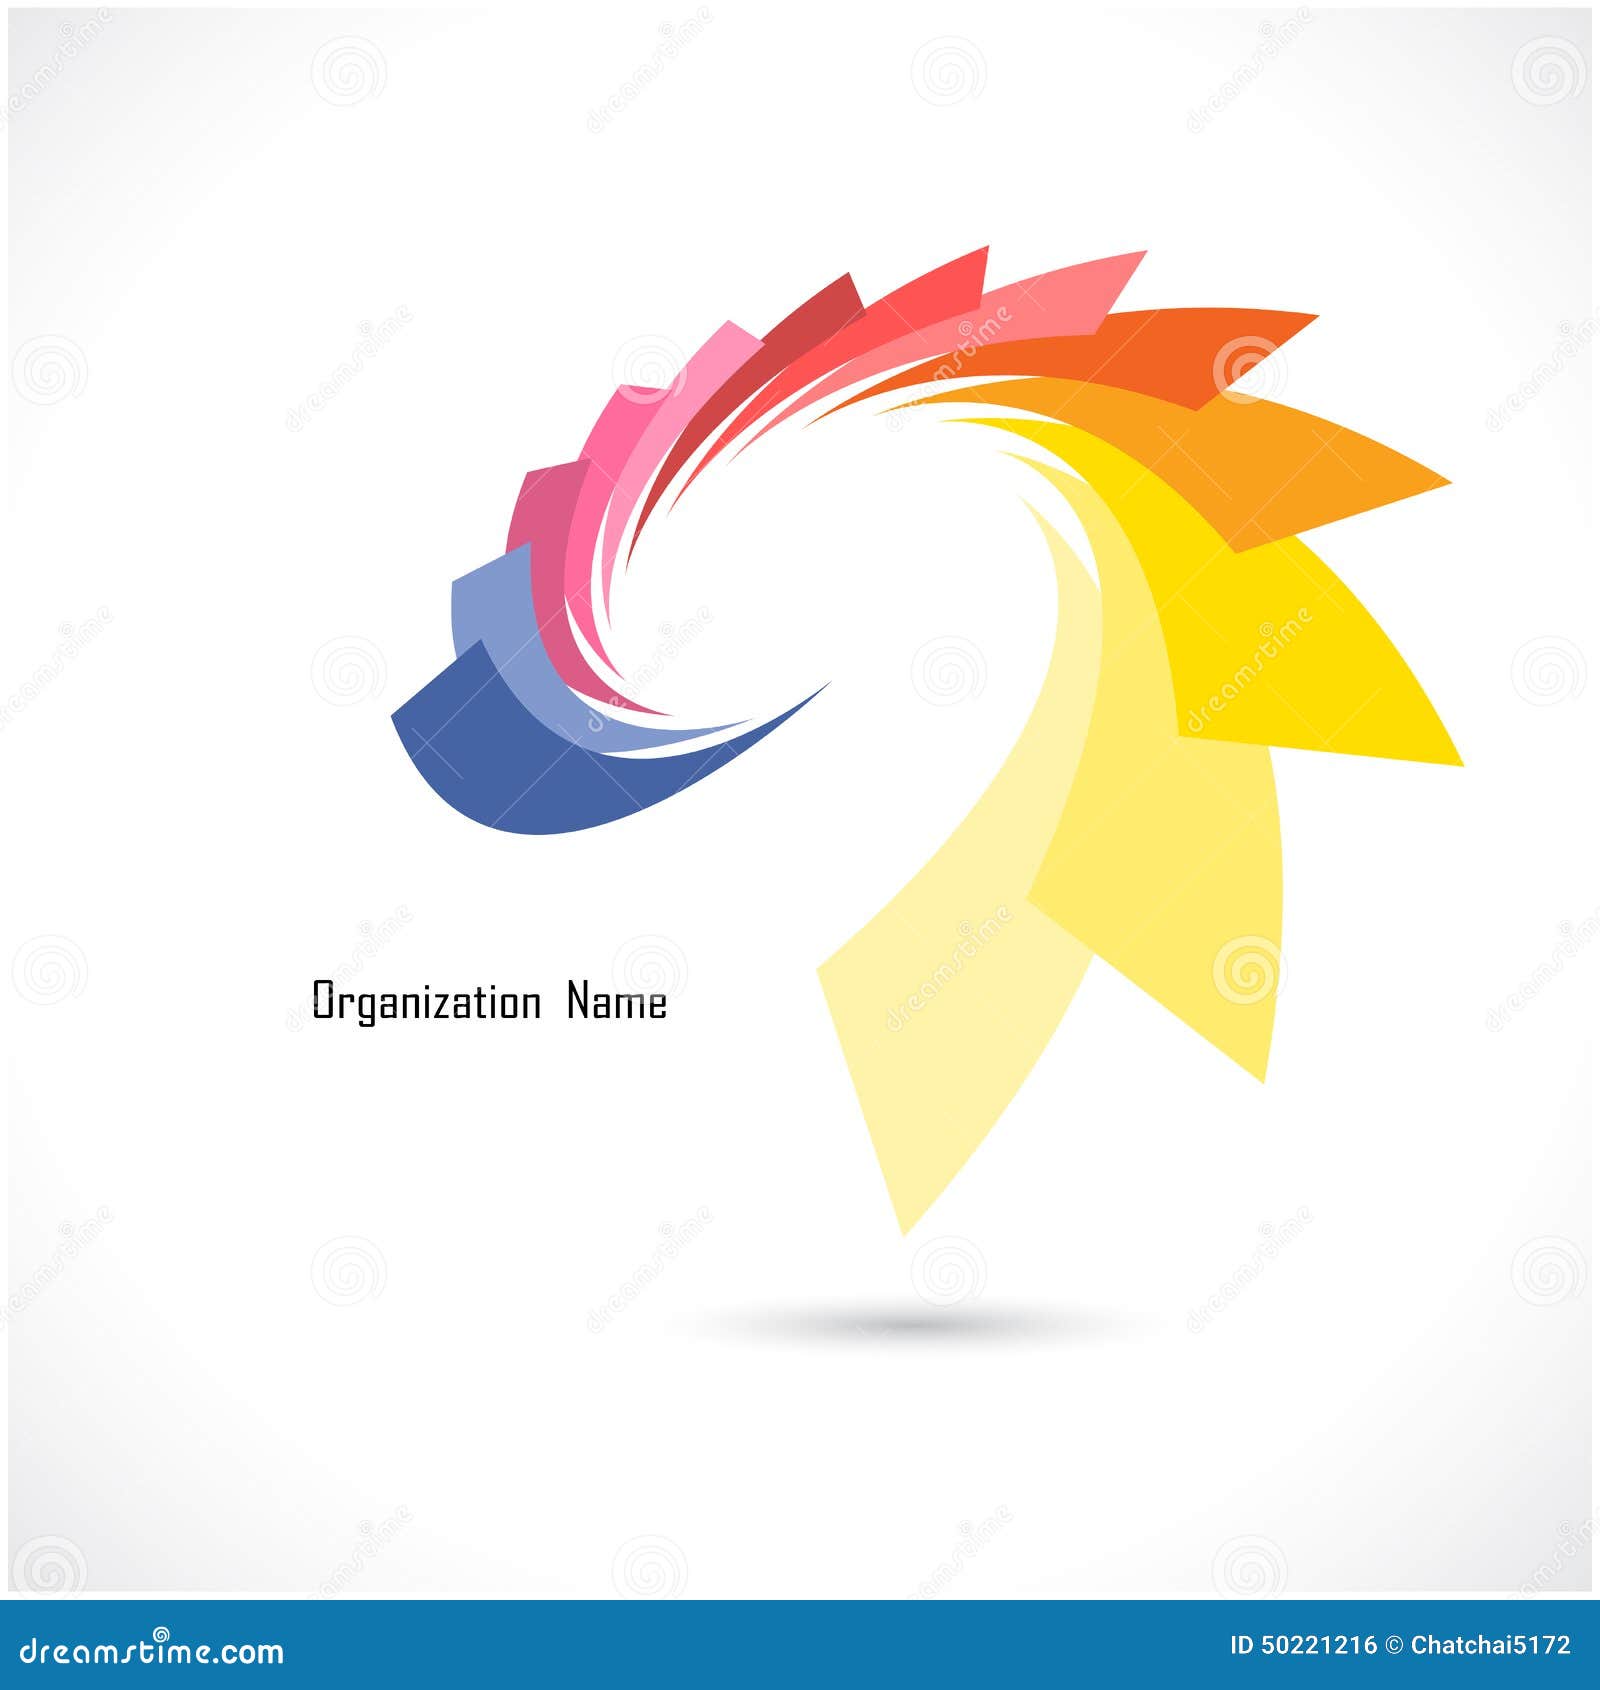 Creative Abstract Vector Logo Design Template. Corporate Business Intended For Business Logo Templates Free Download